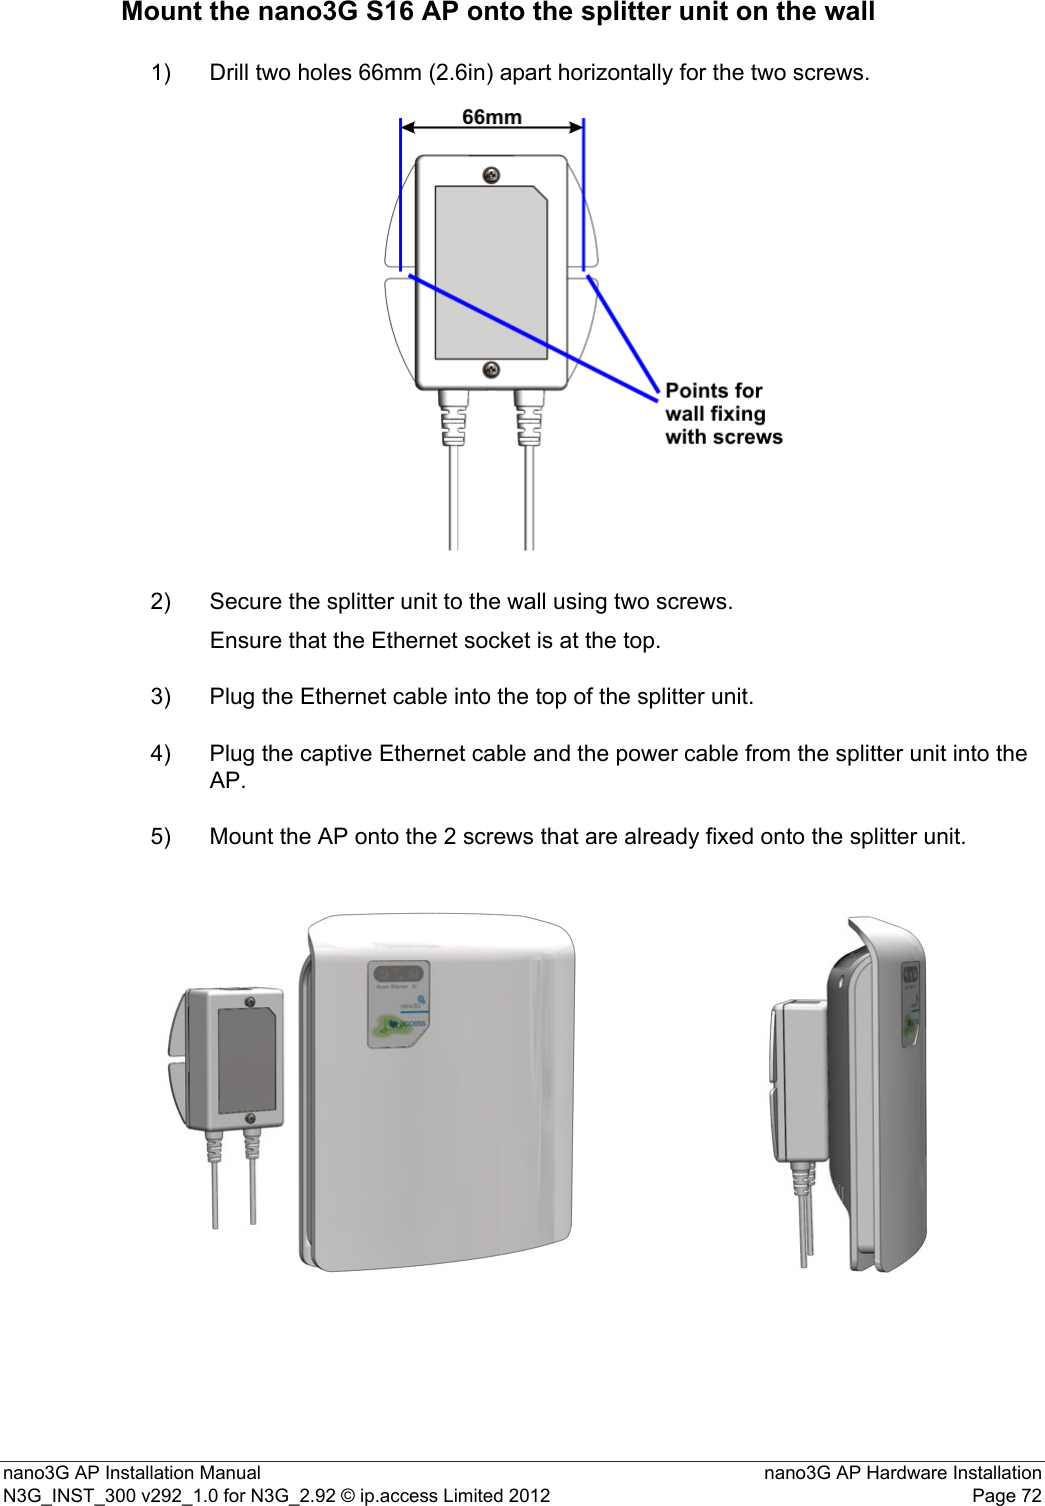 nano3G AP Installation Manual nano3G AP Hardware InstallationN3G_INST_300 v292_1.0 for N3G_2.92 © ip.access Limited 2012 Page 72Mount the nano3G S16 AP onto the splitter unit on the wall1) Drill two holes 66mm (2.6in) apart horizontally for the two screws.2) Secure the splitter unit to the wall using two screws.Ensure that the Ethernet socket is at the top.3) Plug the Ethernet cable into the top of the splitter unit.4) Plug the captive Ethernet cable and the power cable from the splitter unit into the AP.5) Mount the AP onto the 2 screws that are already fixed onto the splitter unit.